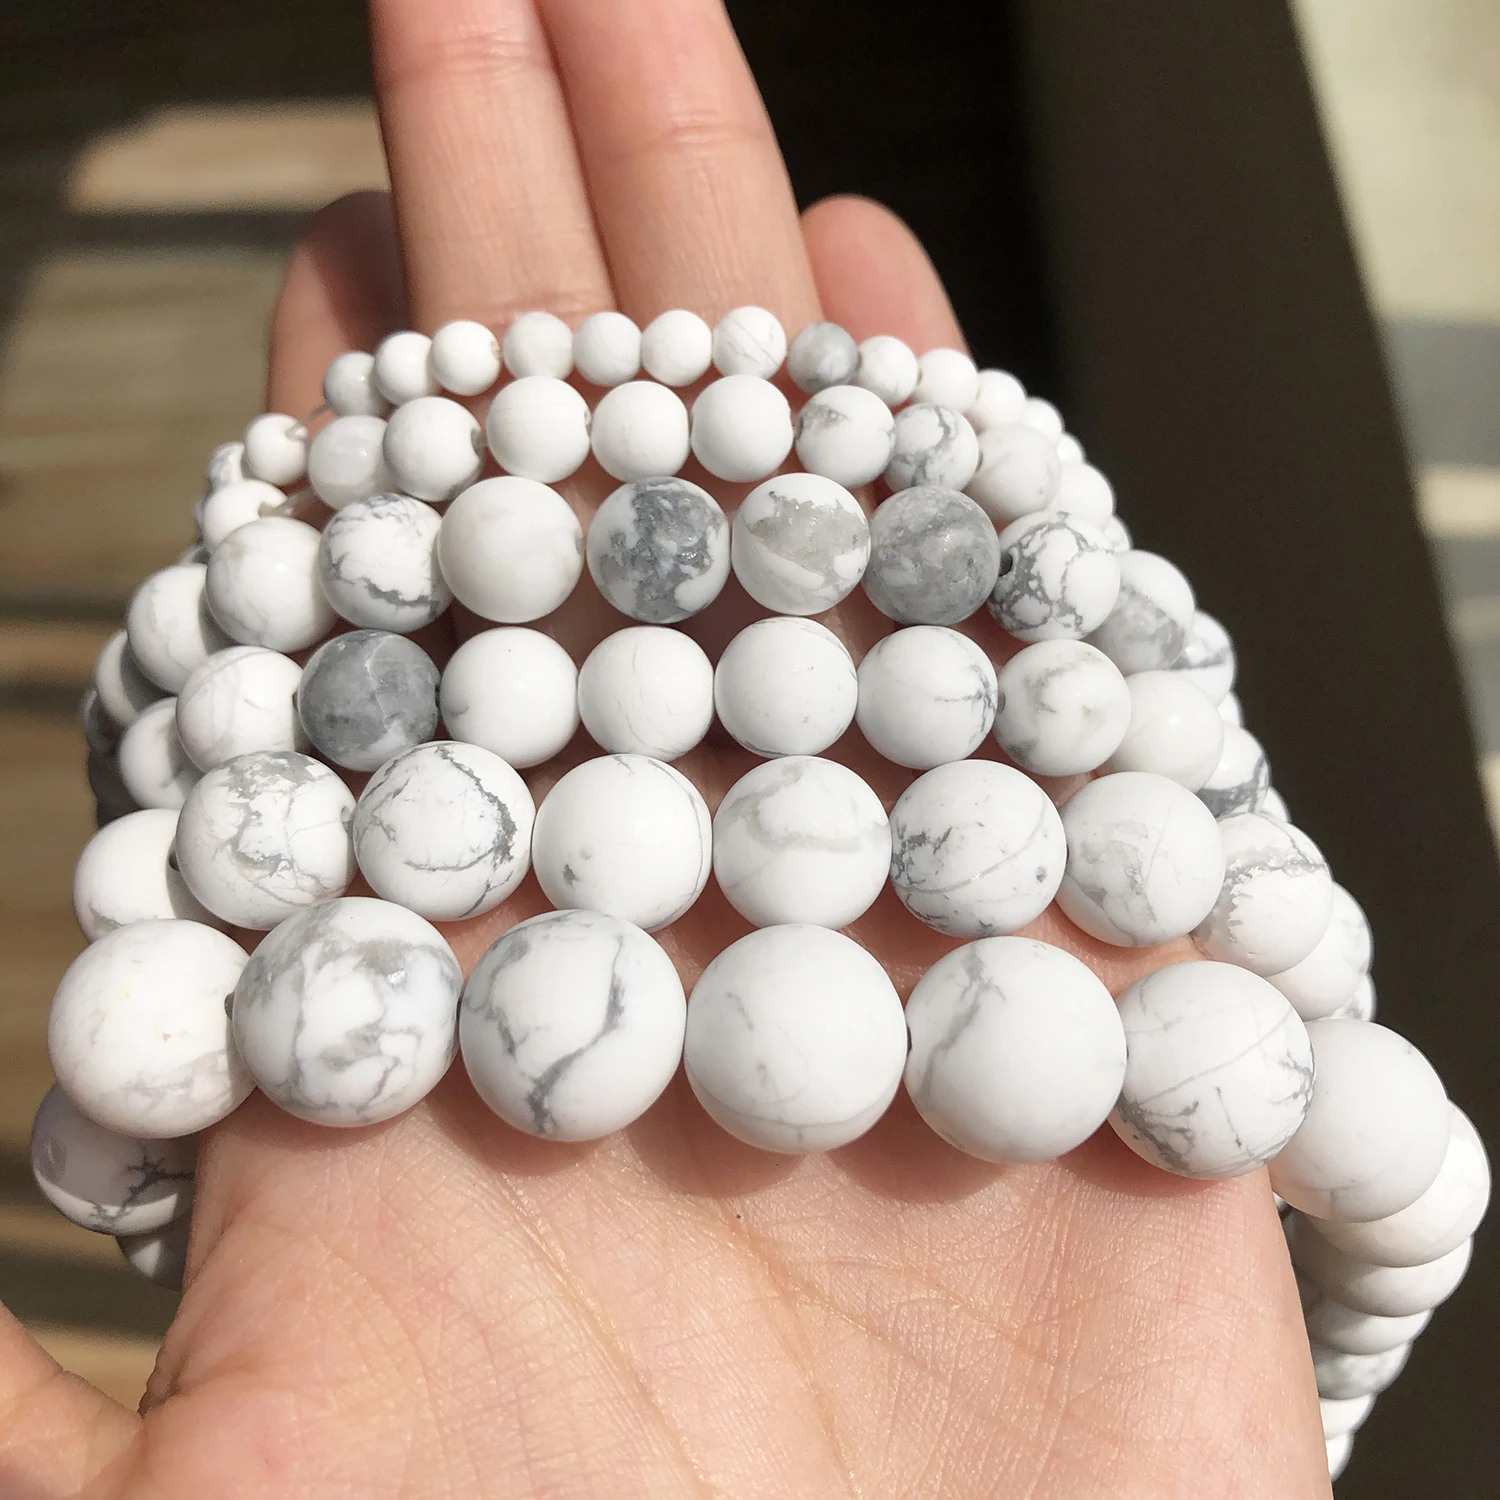 4-12mm Matte White Howlite Turquoises Round Loose Beads Natural Minerals Spacer Beads For Jewelry Making Needlework DIY Bracelet